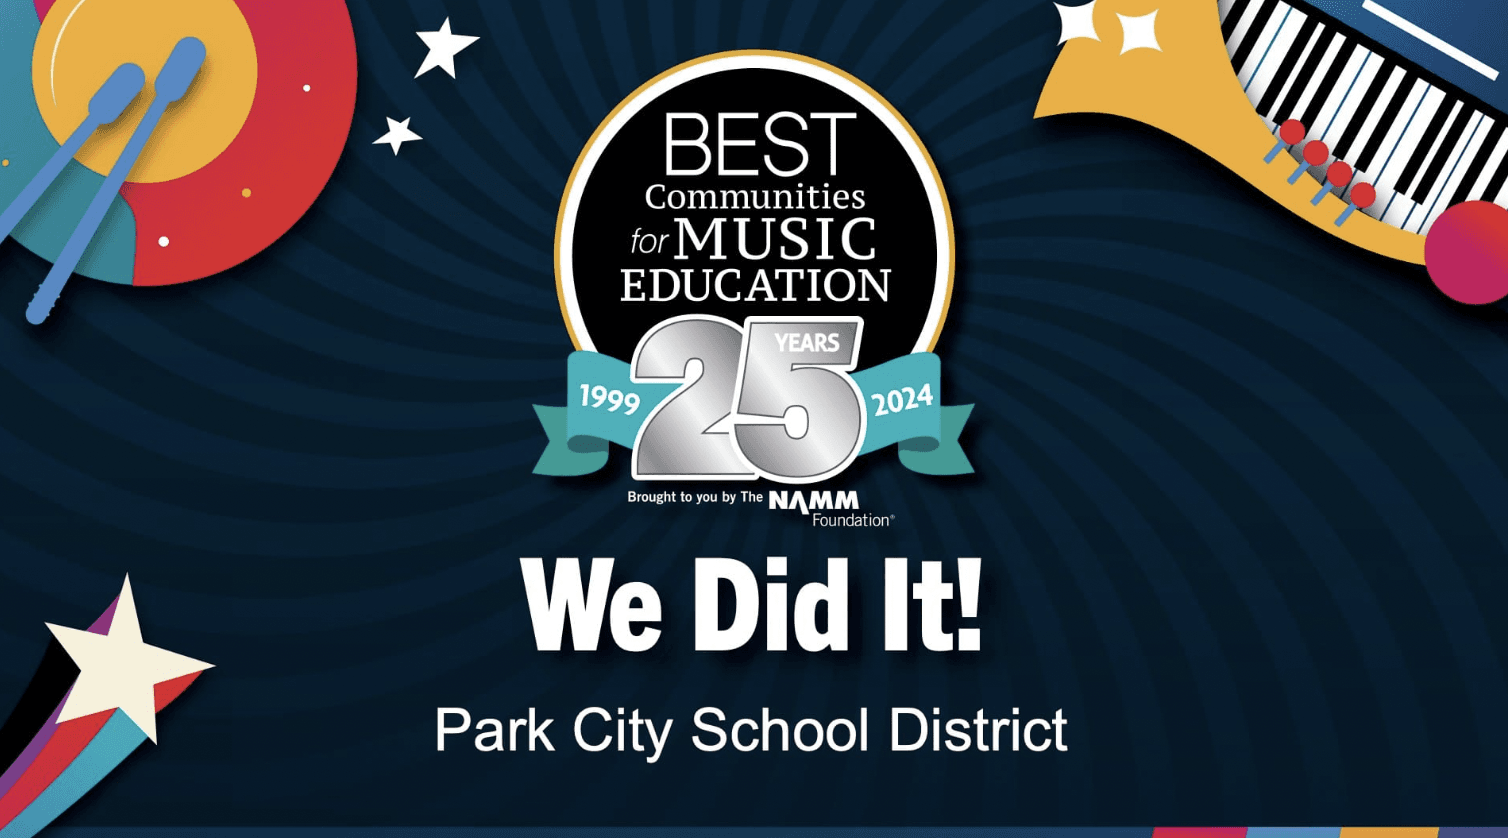 Park City School District Receives National Music Education Award